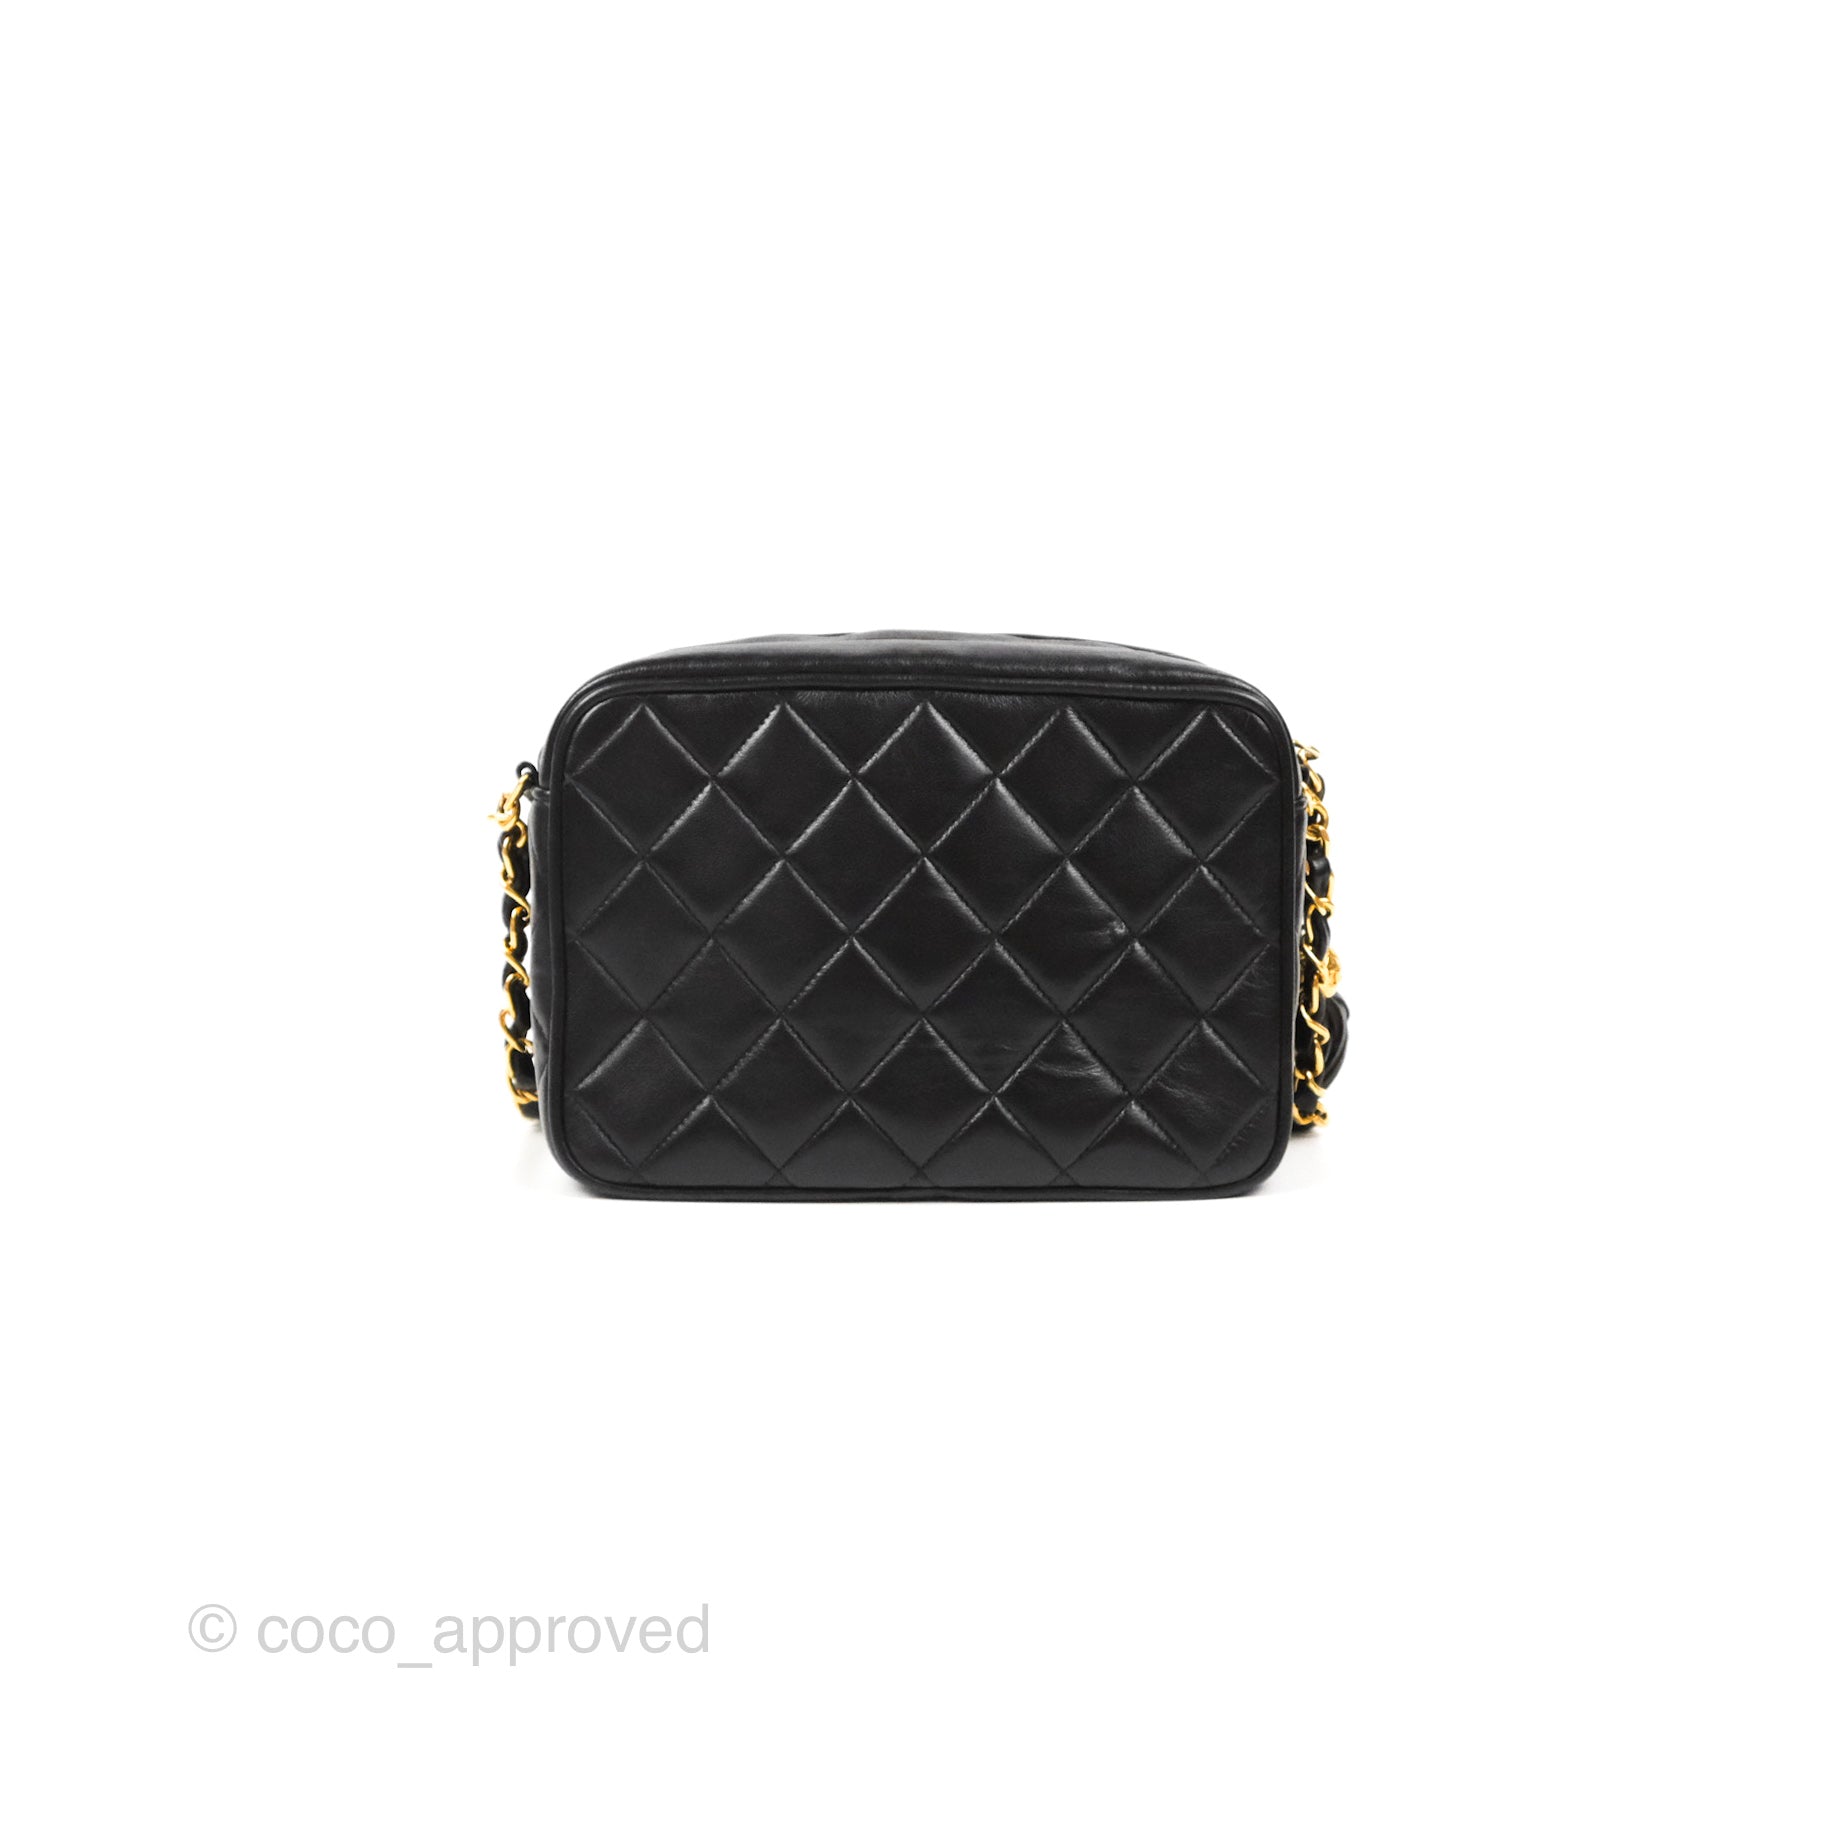 Chanel Black Quilted Lambskin Tassel Camera Bag in United States